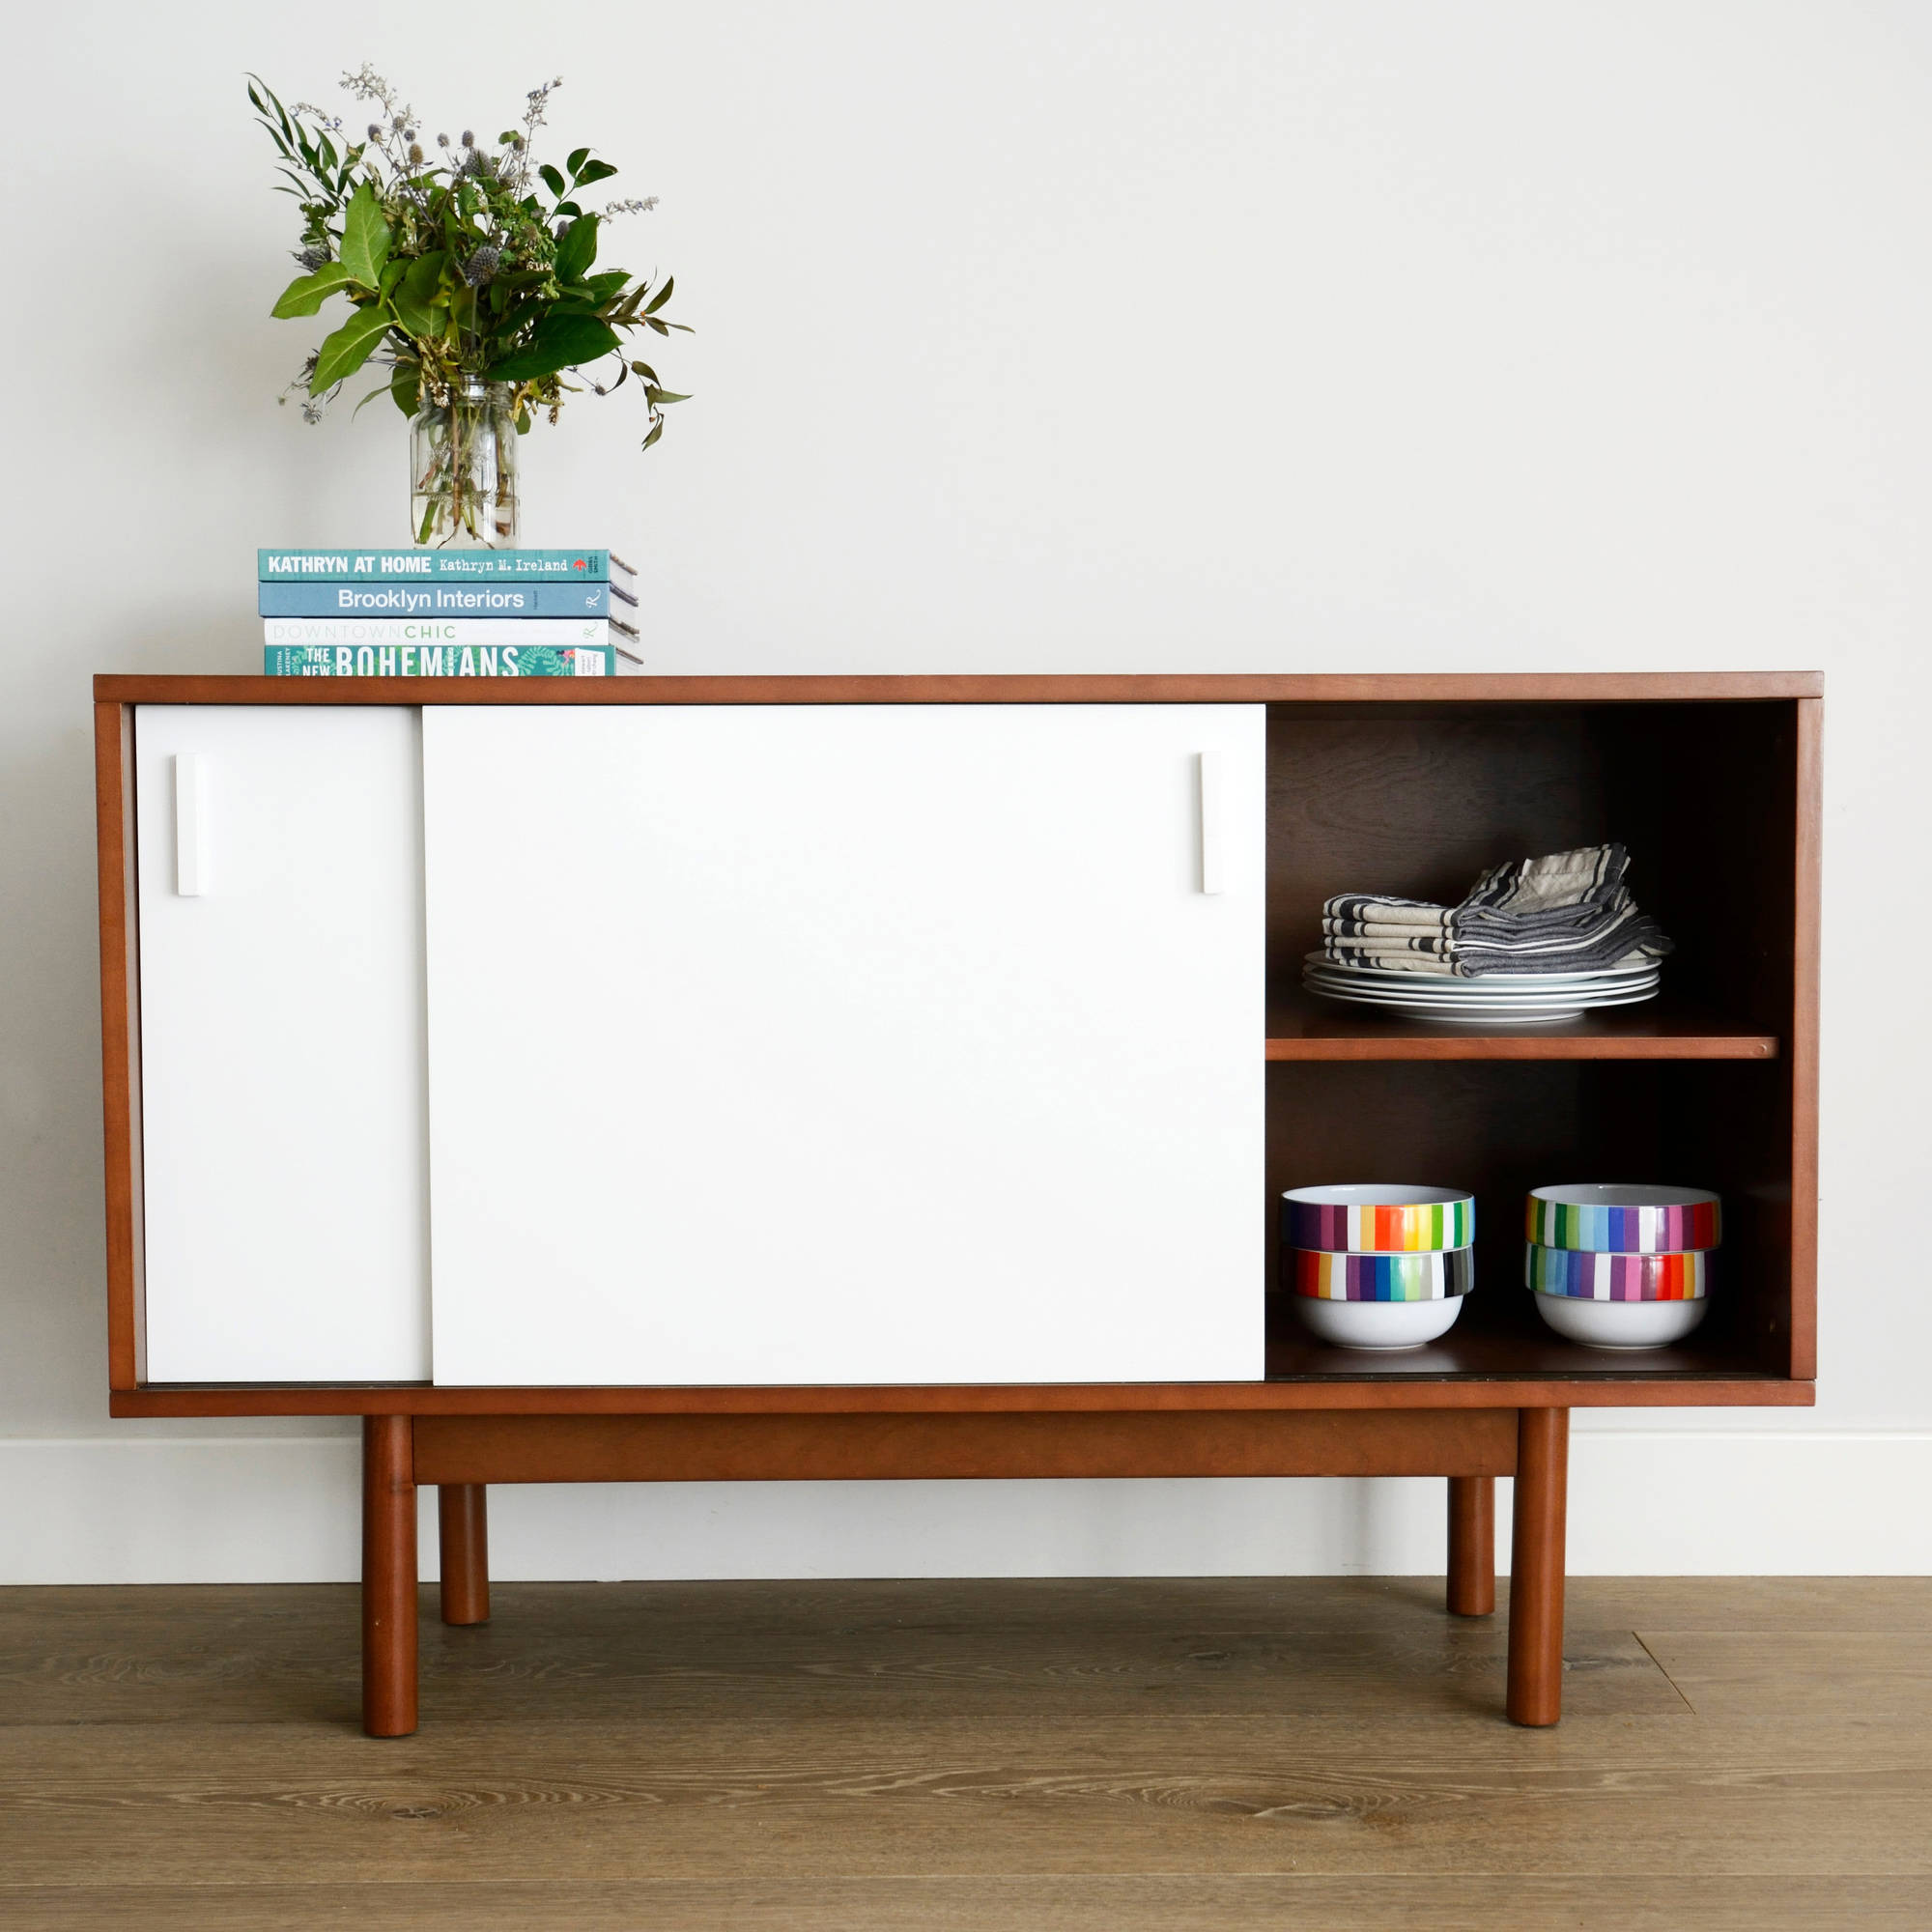 Better Homes & Garden Baxter Wood Credenza, White Finish - image 1 of 3